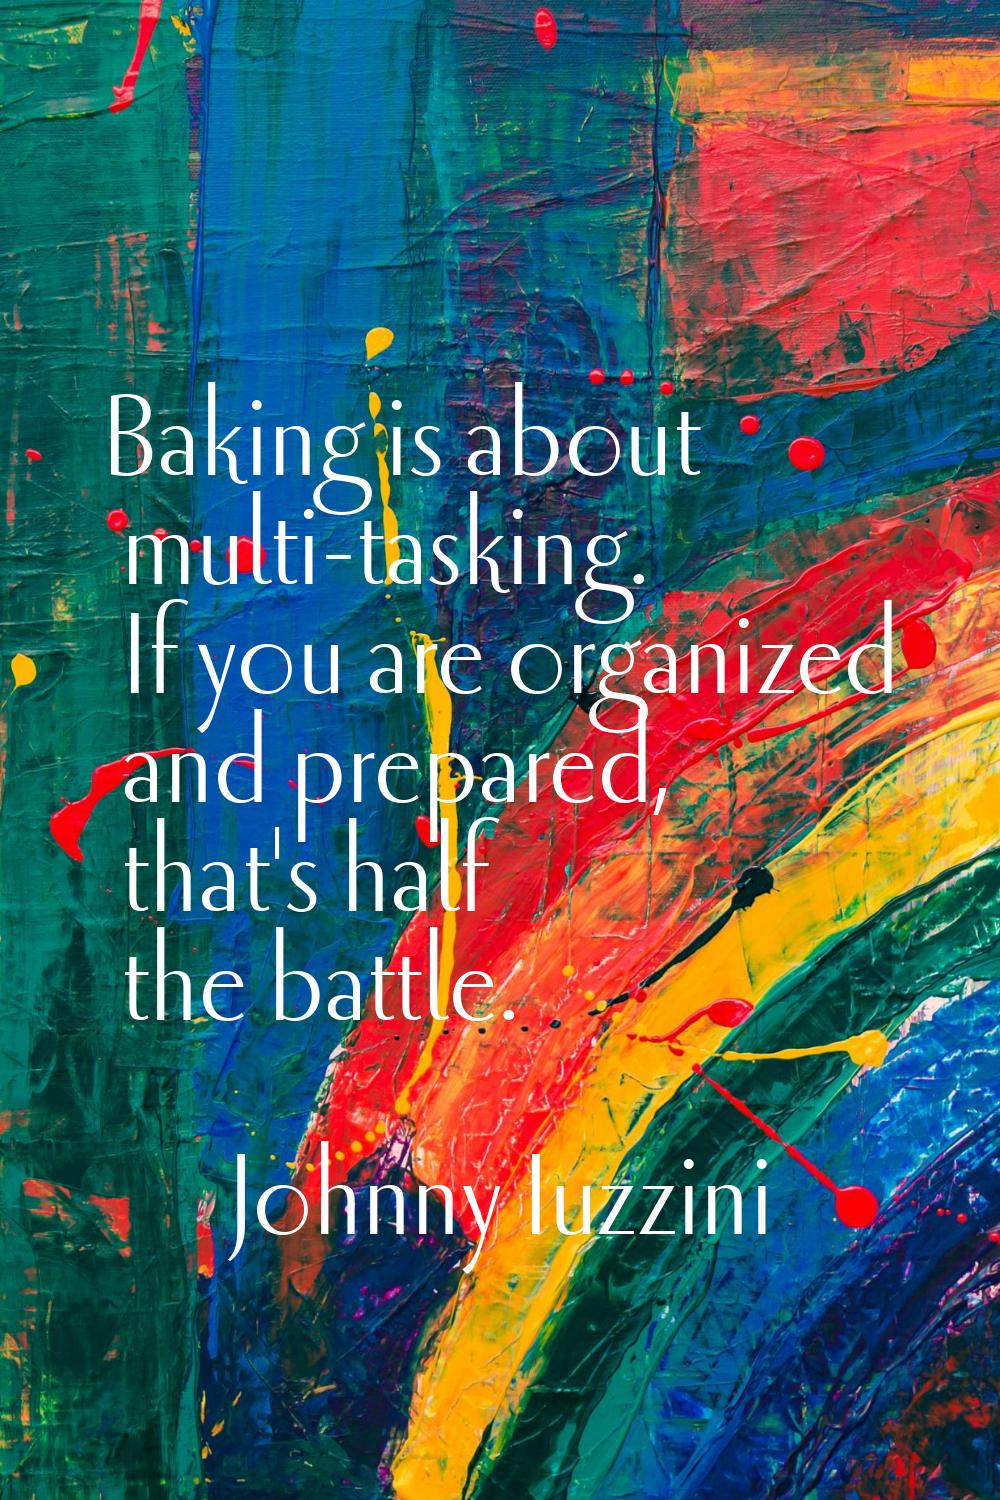 Baking is about multi-tasking. If you are organized and prepared, that's half the battle.